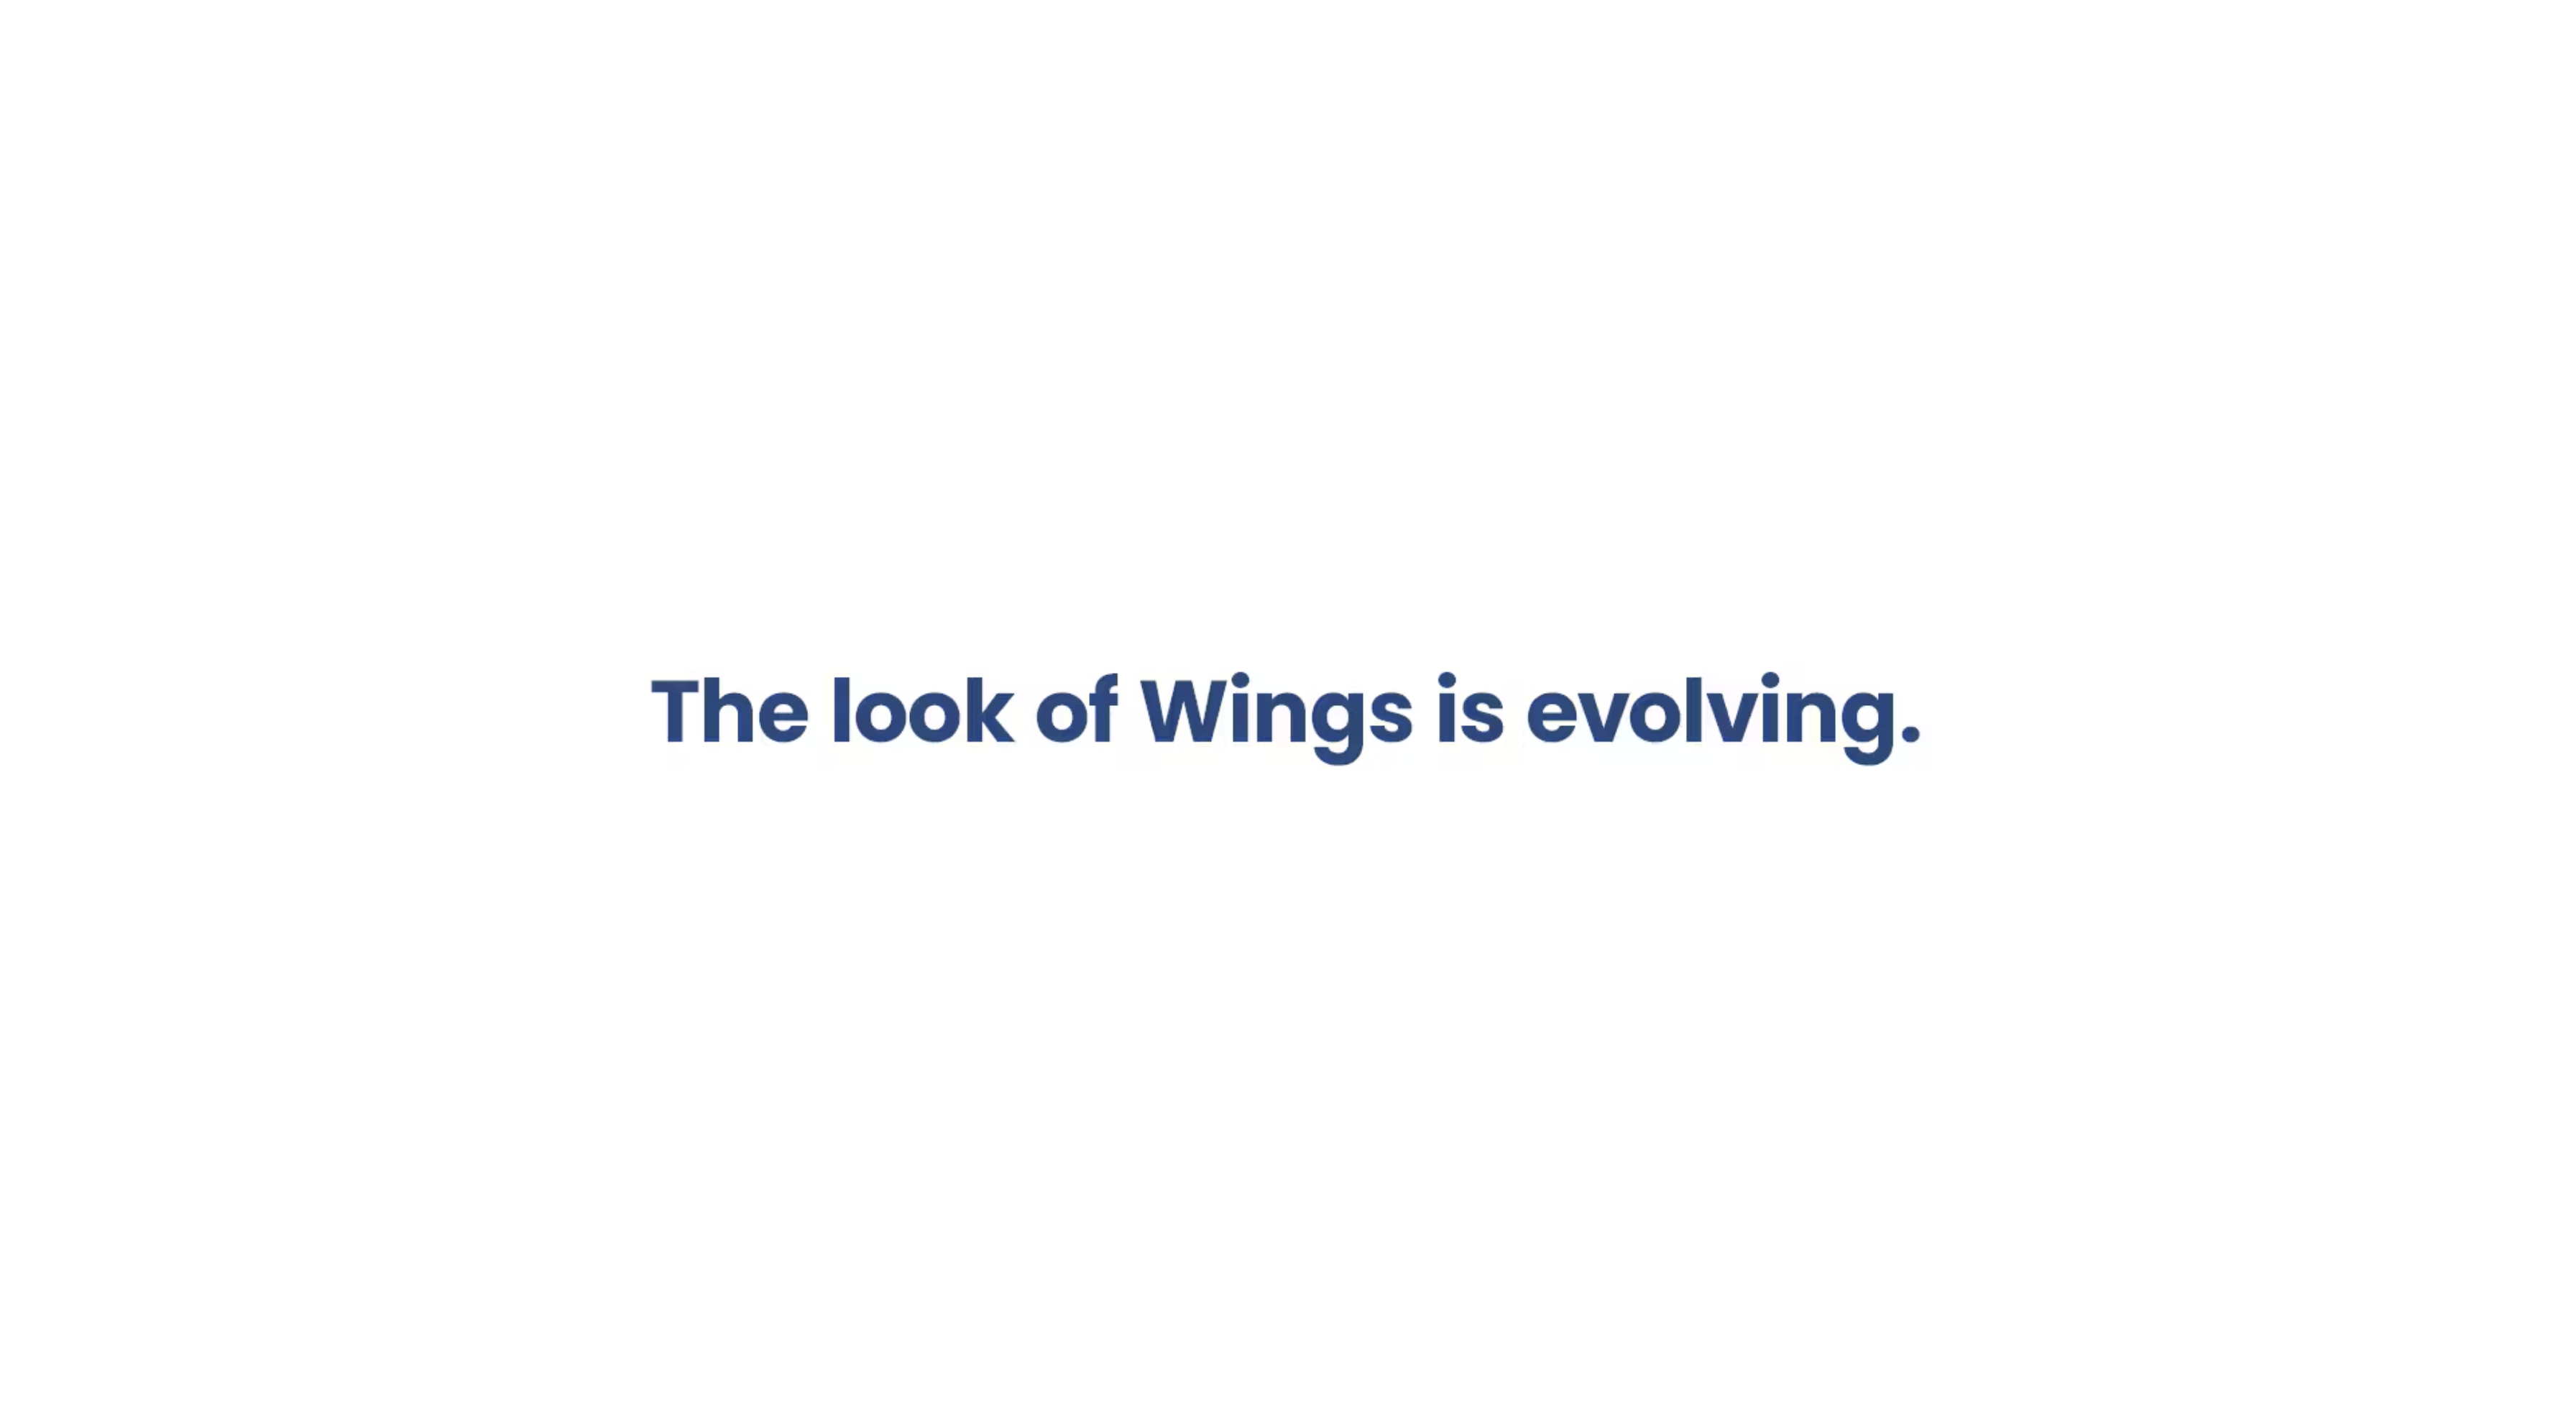 Blue text on screen says, "The Look of Wings is evolving."